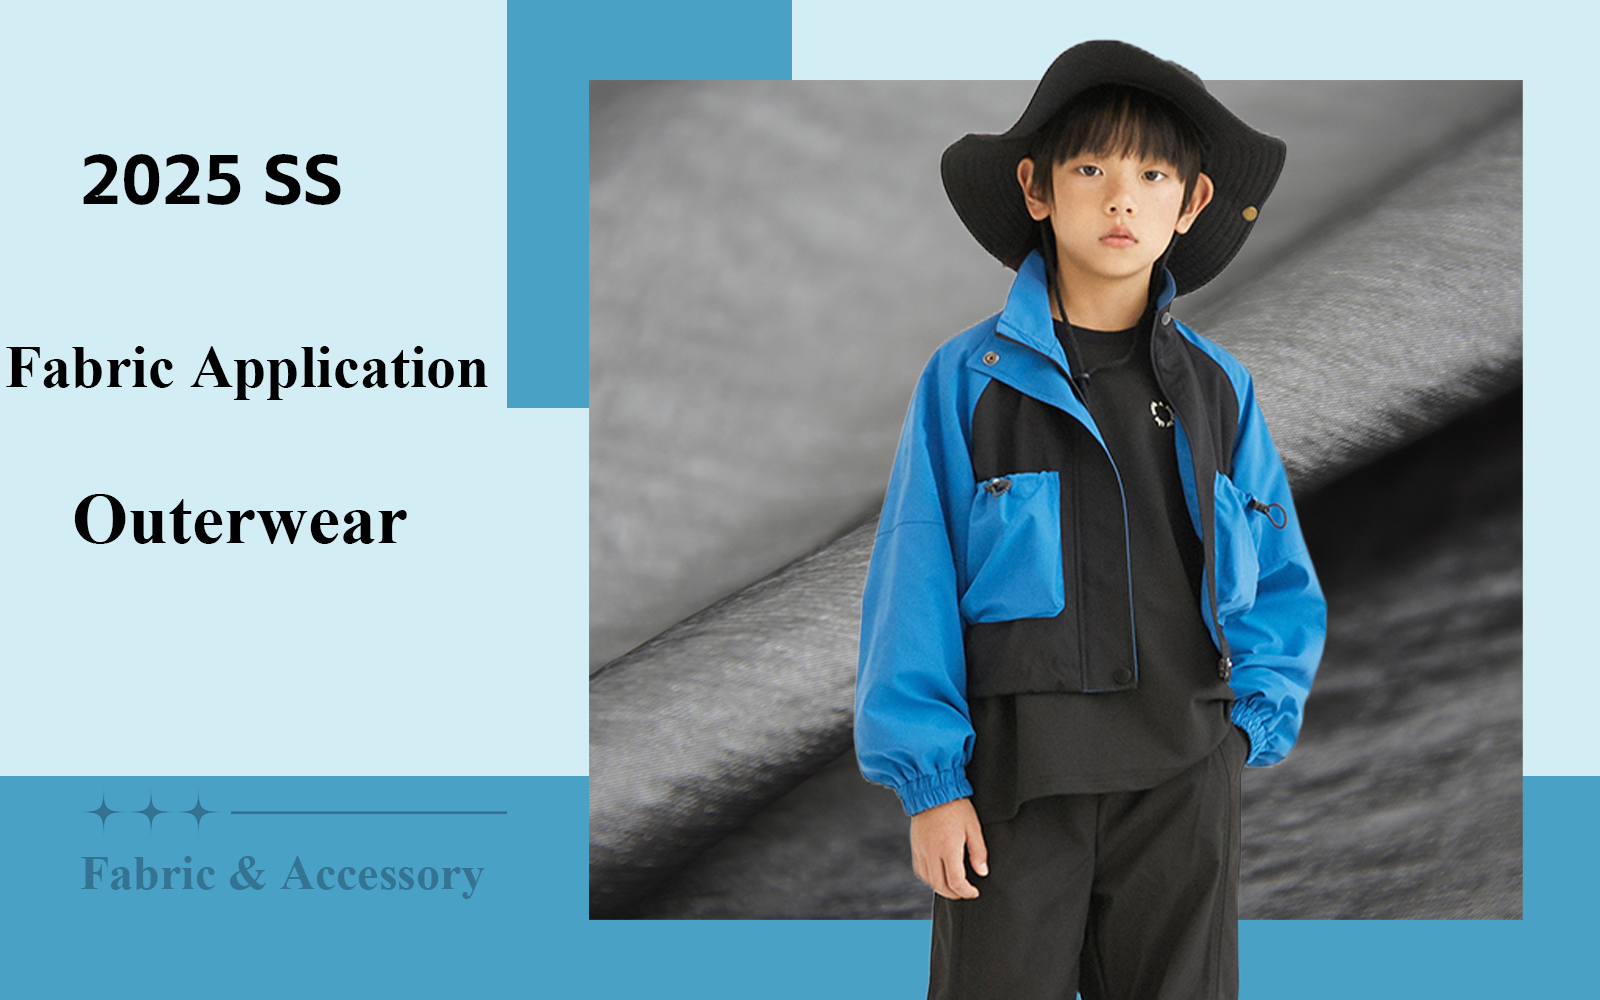 Outdoor Sports -- The Fabric Trend for Boys' Outerwear